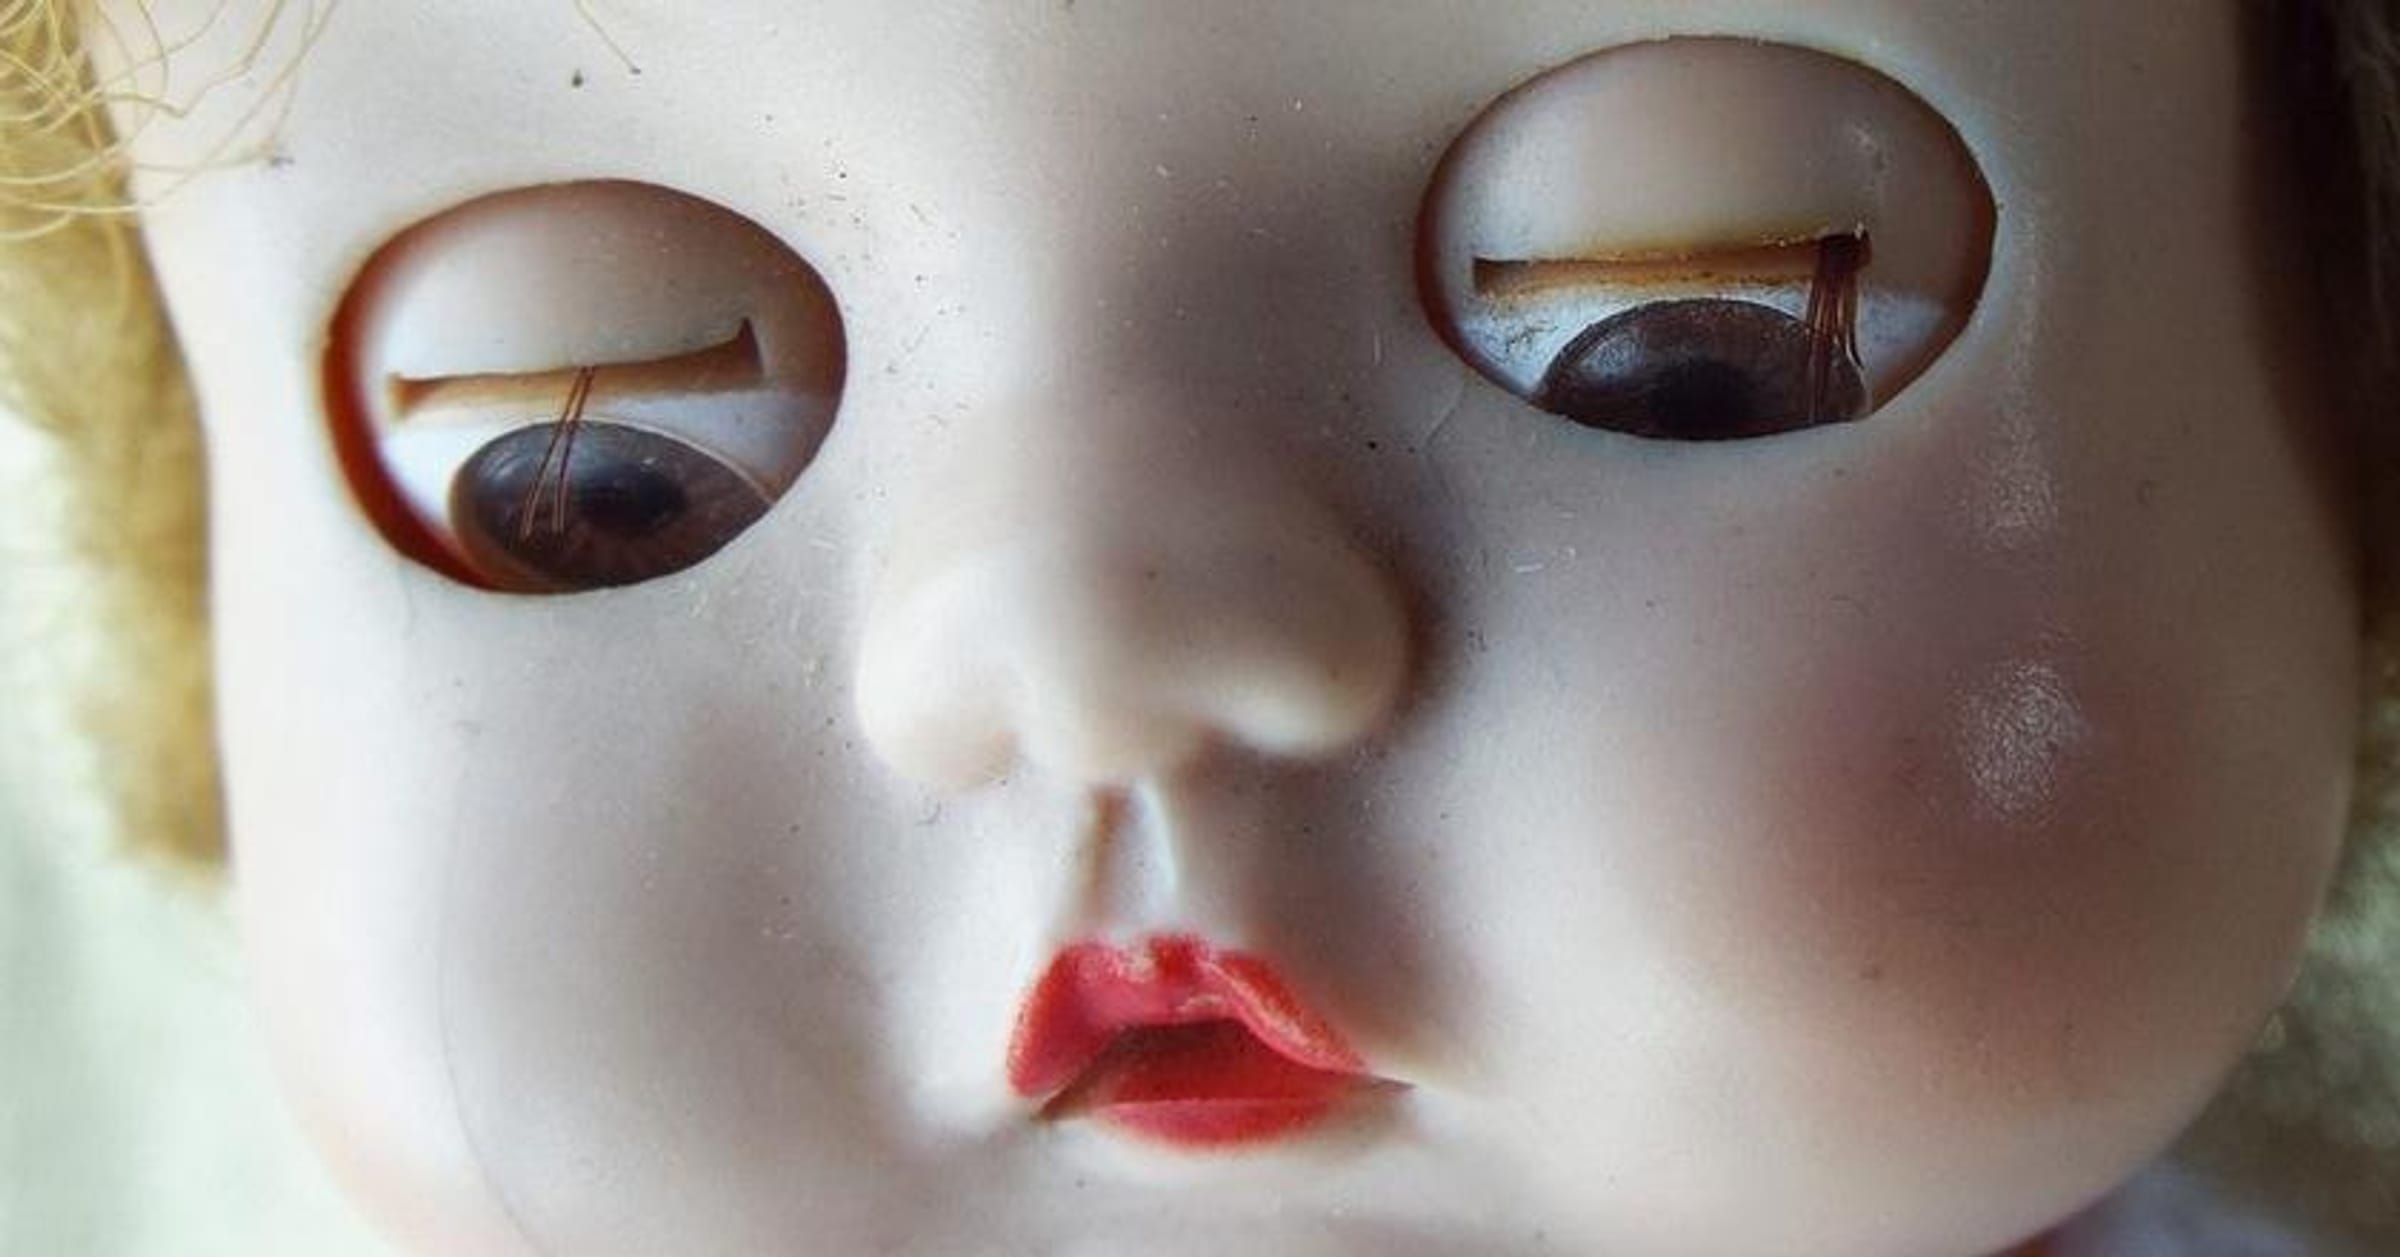 Why Antique Bisque Dolls Are Considered Creepy, Haunted & Scary.. 